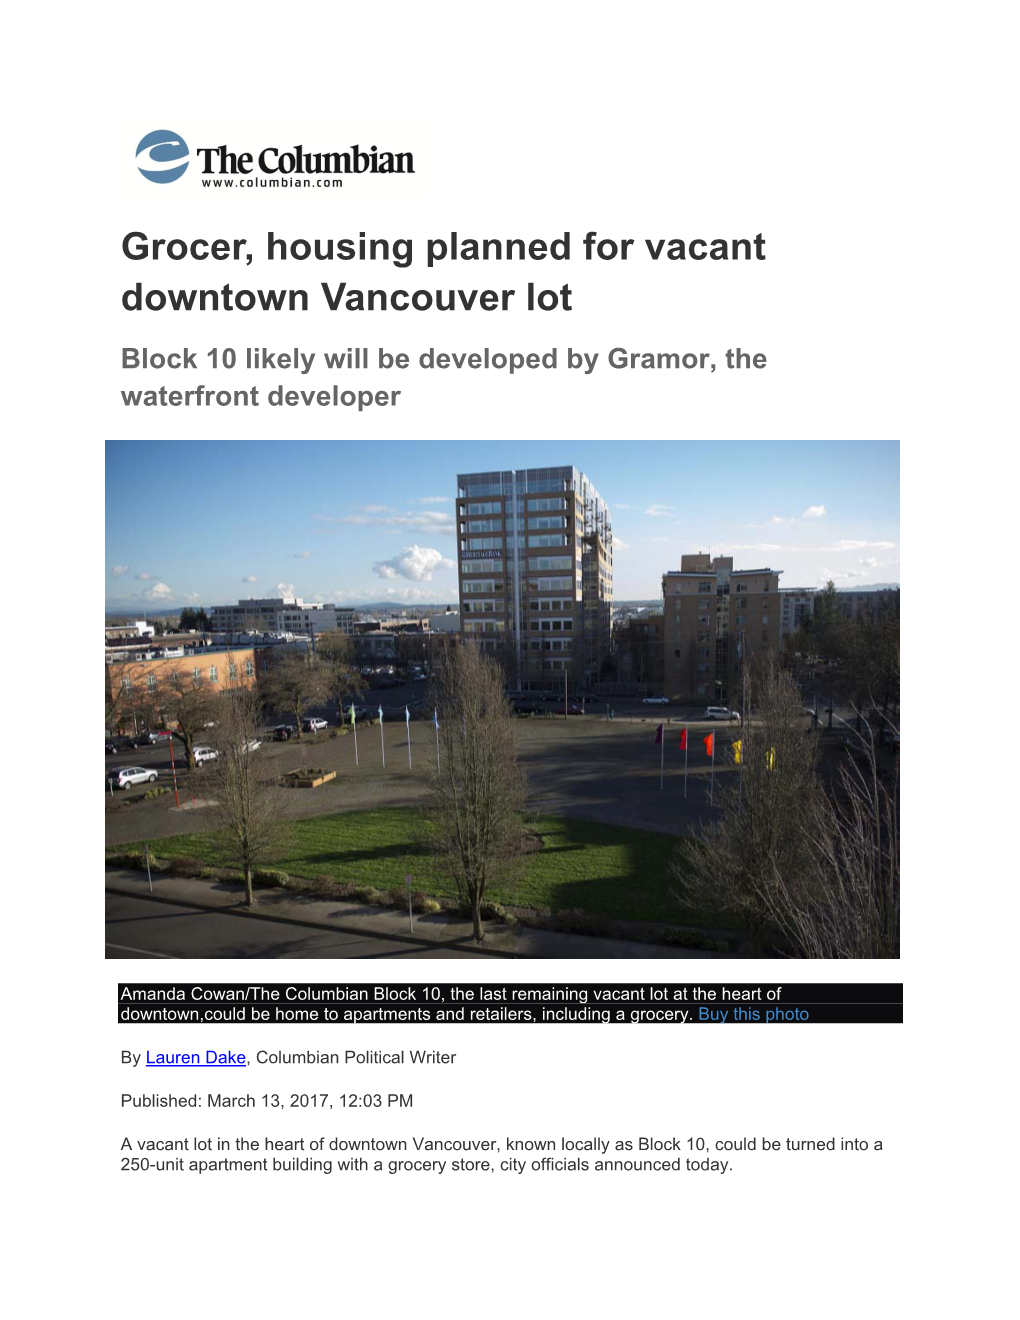 Grocer, Housing Planned for Vacant Downtown Vancouver Lot Block 10 Likely Will Be Developed by Gramor, the Waterfront Developer